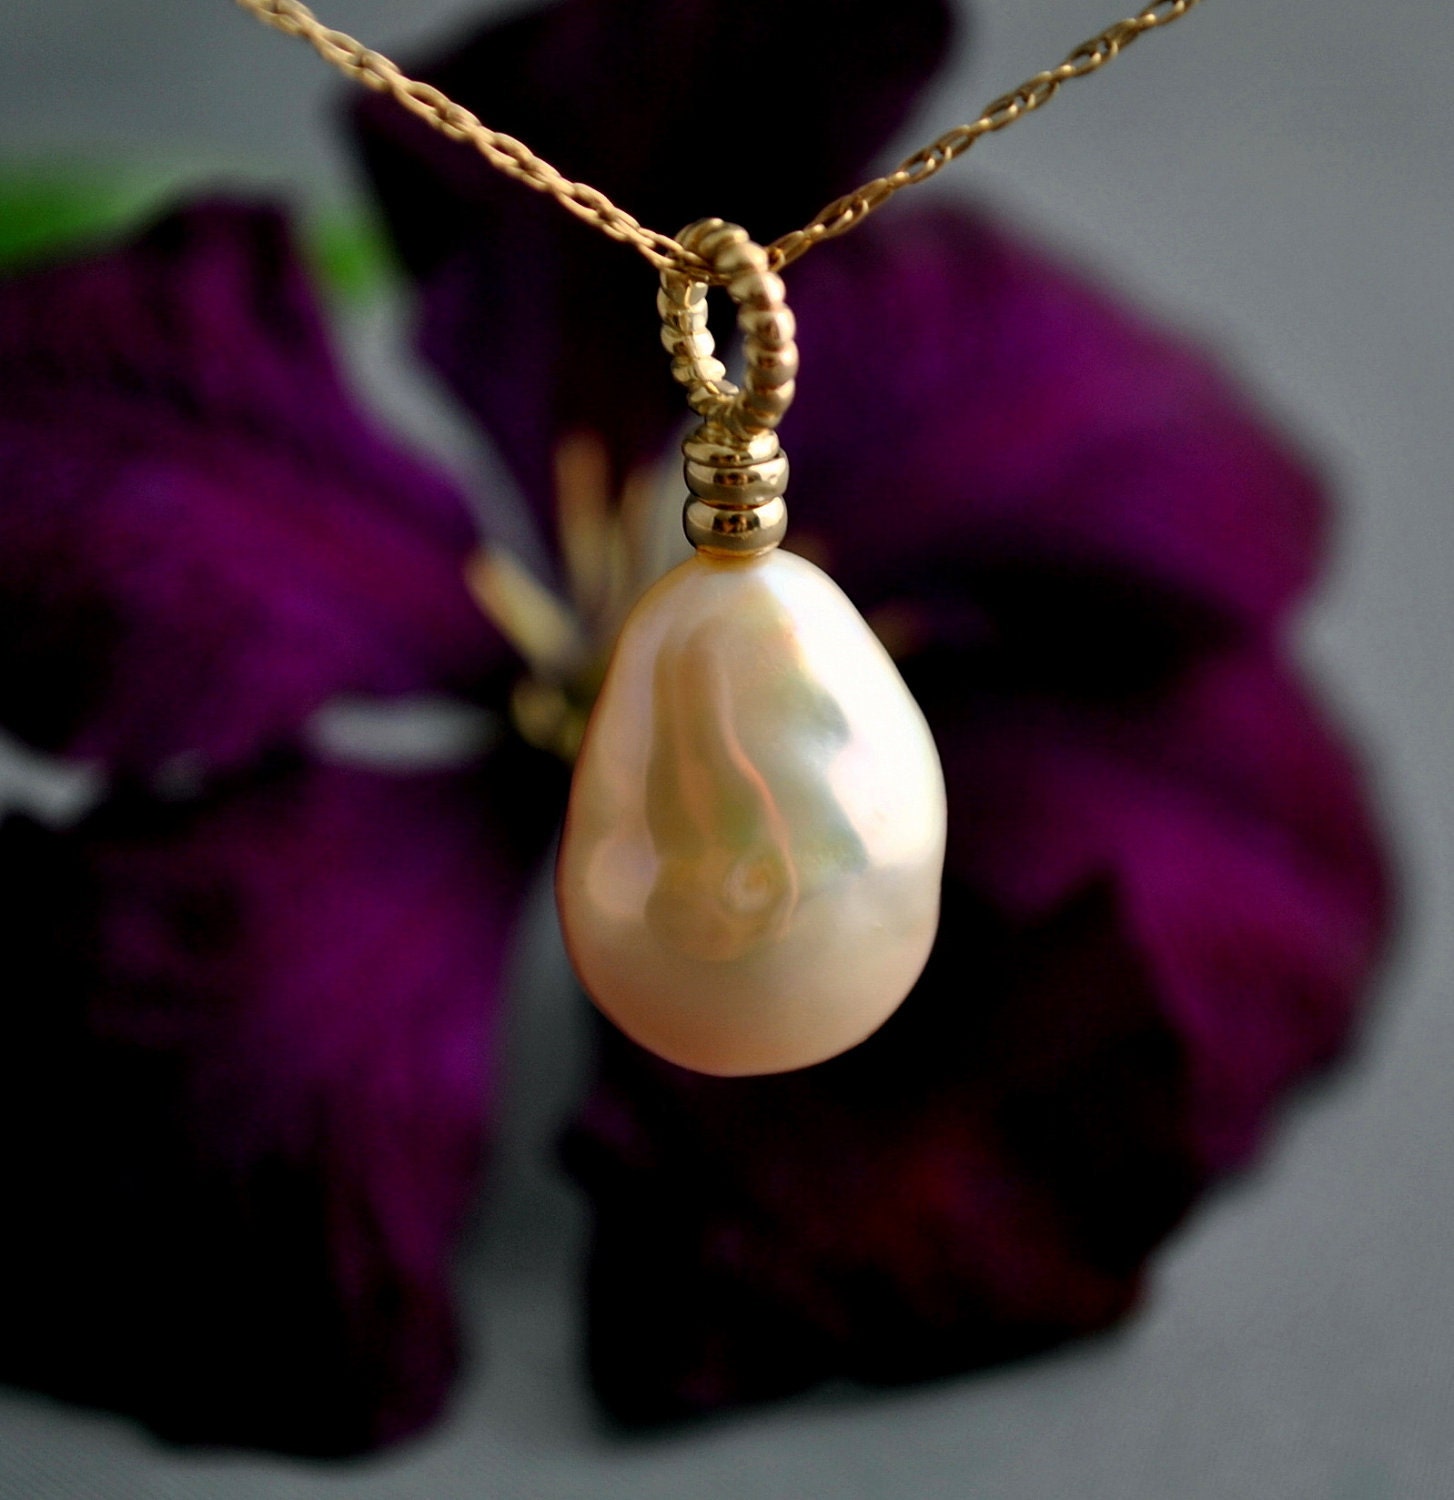 Sula- the large ripe apricot nucleated baroque drop solitaire pearl pendant set in solid 14kt yellow gold - not plated